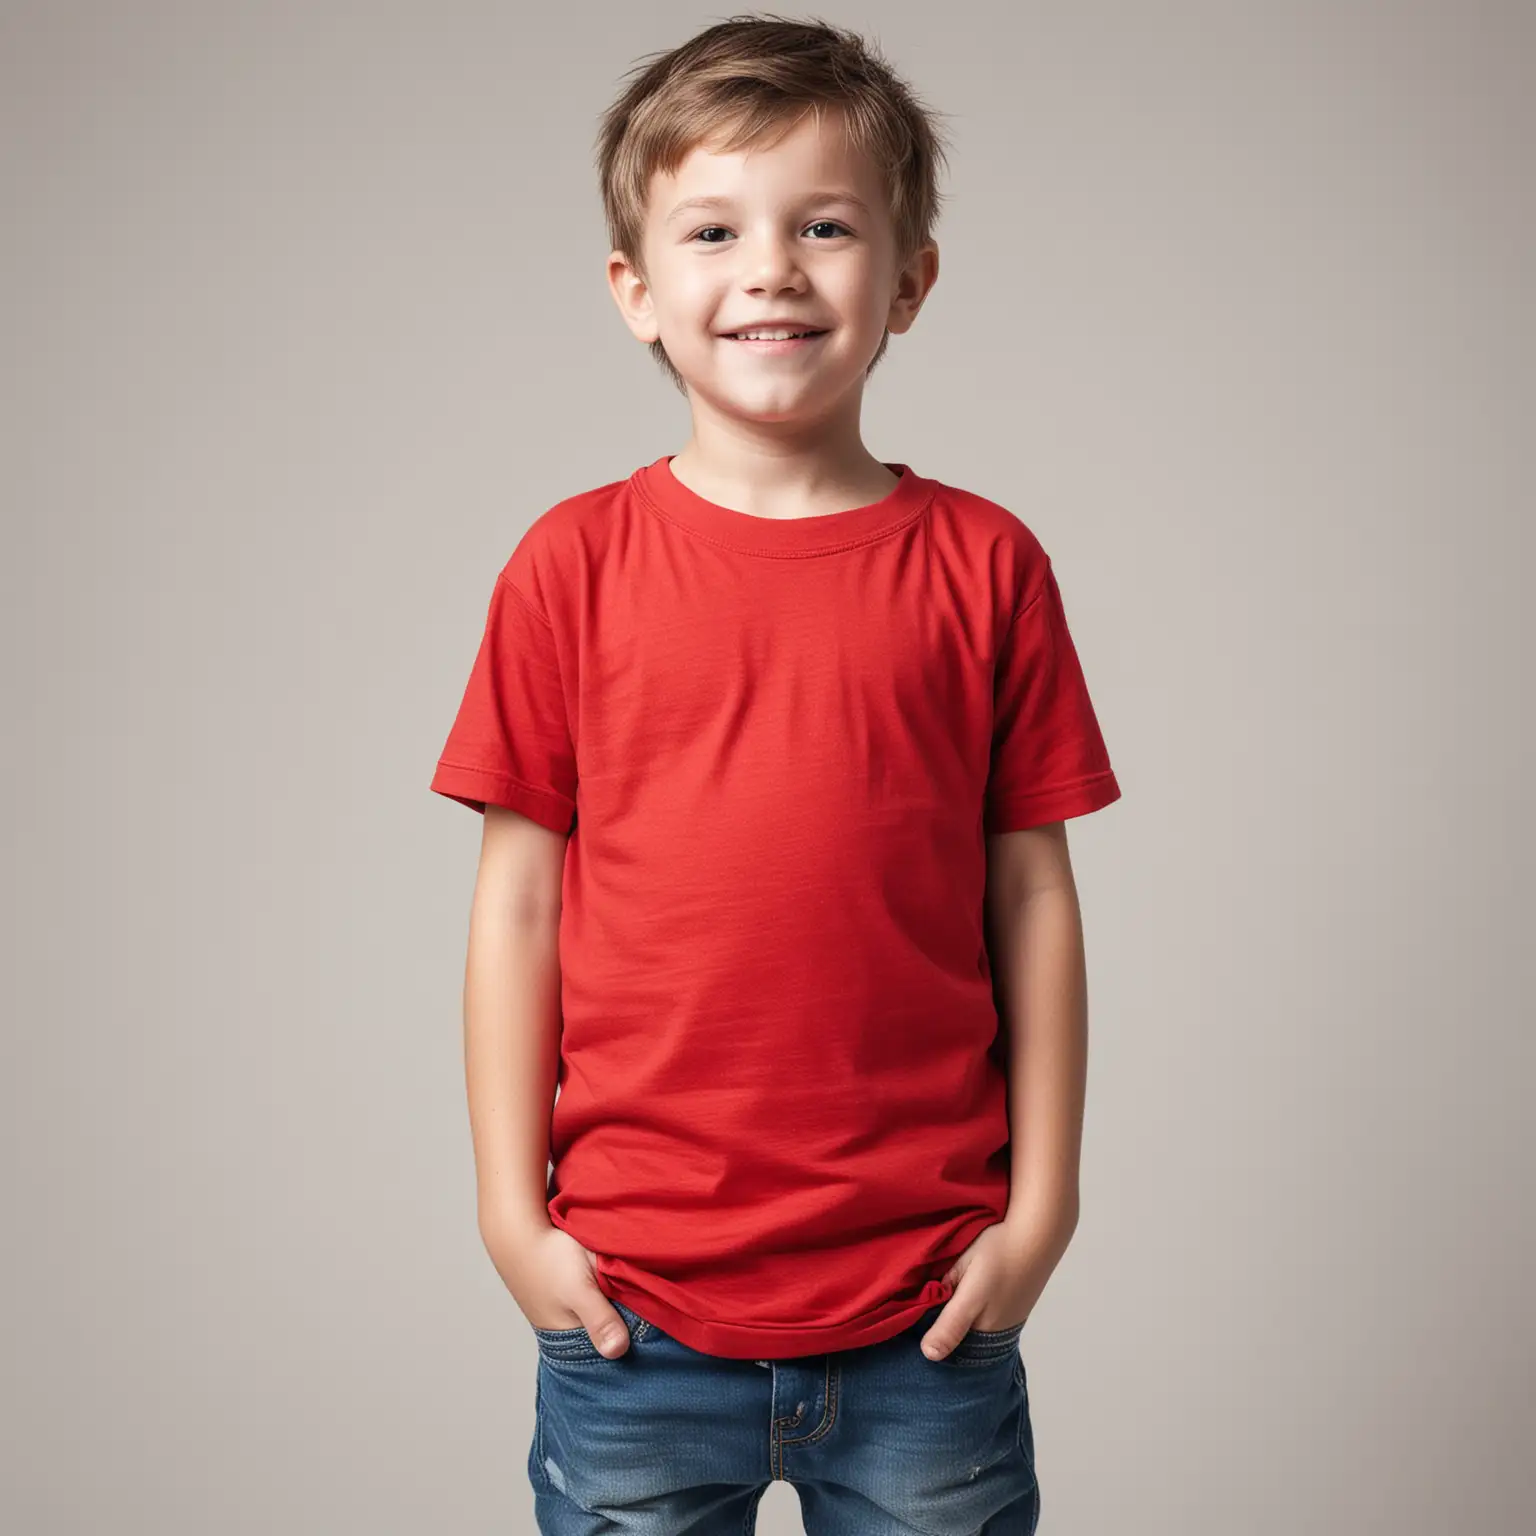 a cute white kid with red t shirt, style, white background